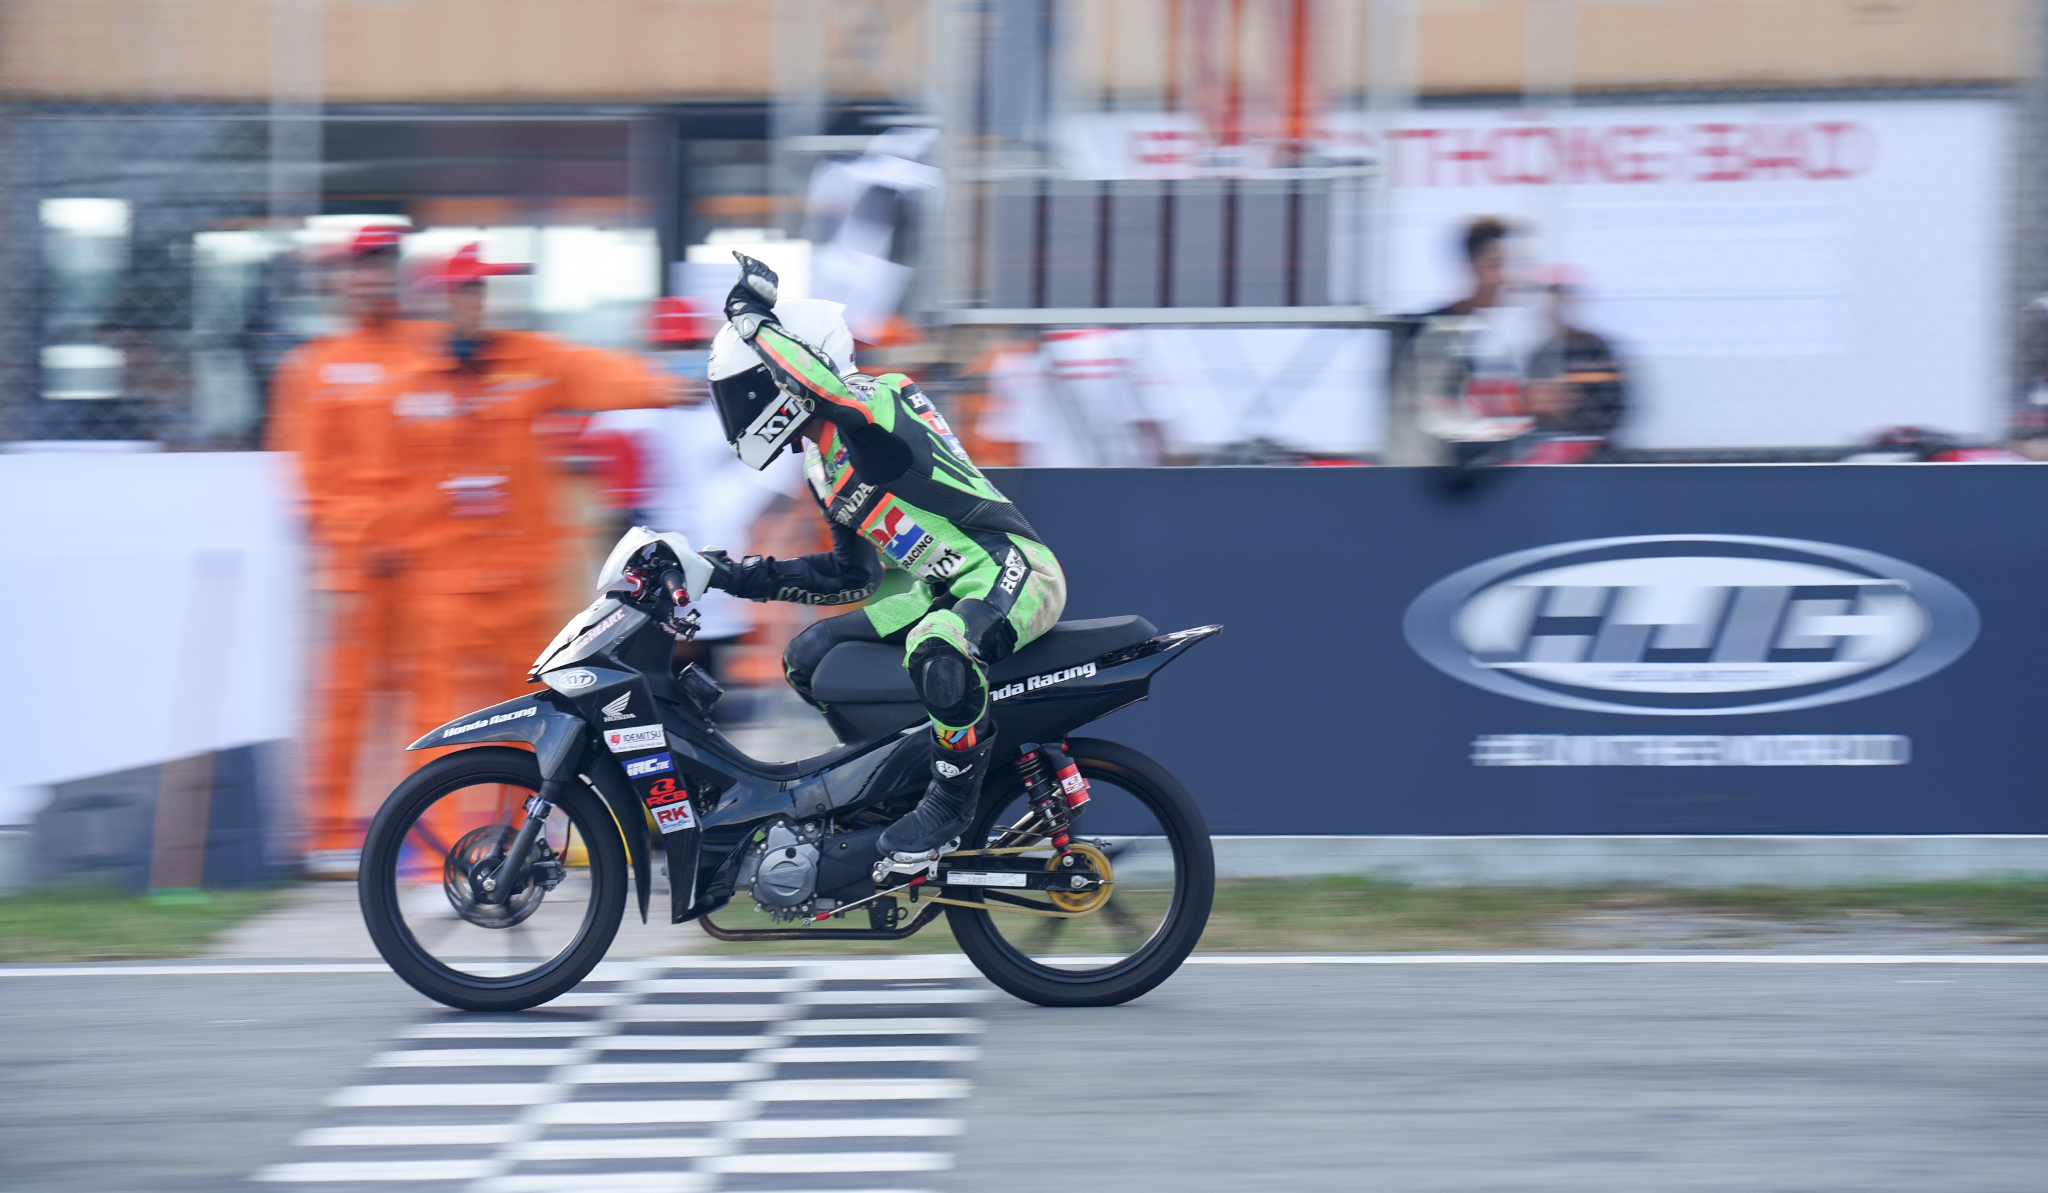 Stage 3 VMRC 2020: Duc Thanh shines, Dong Nghi impresses once again